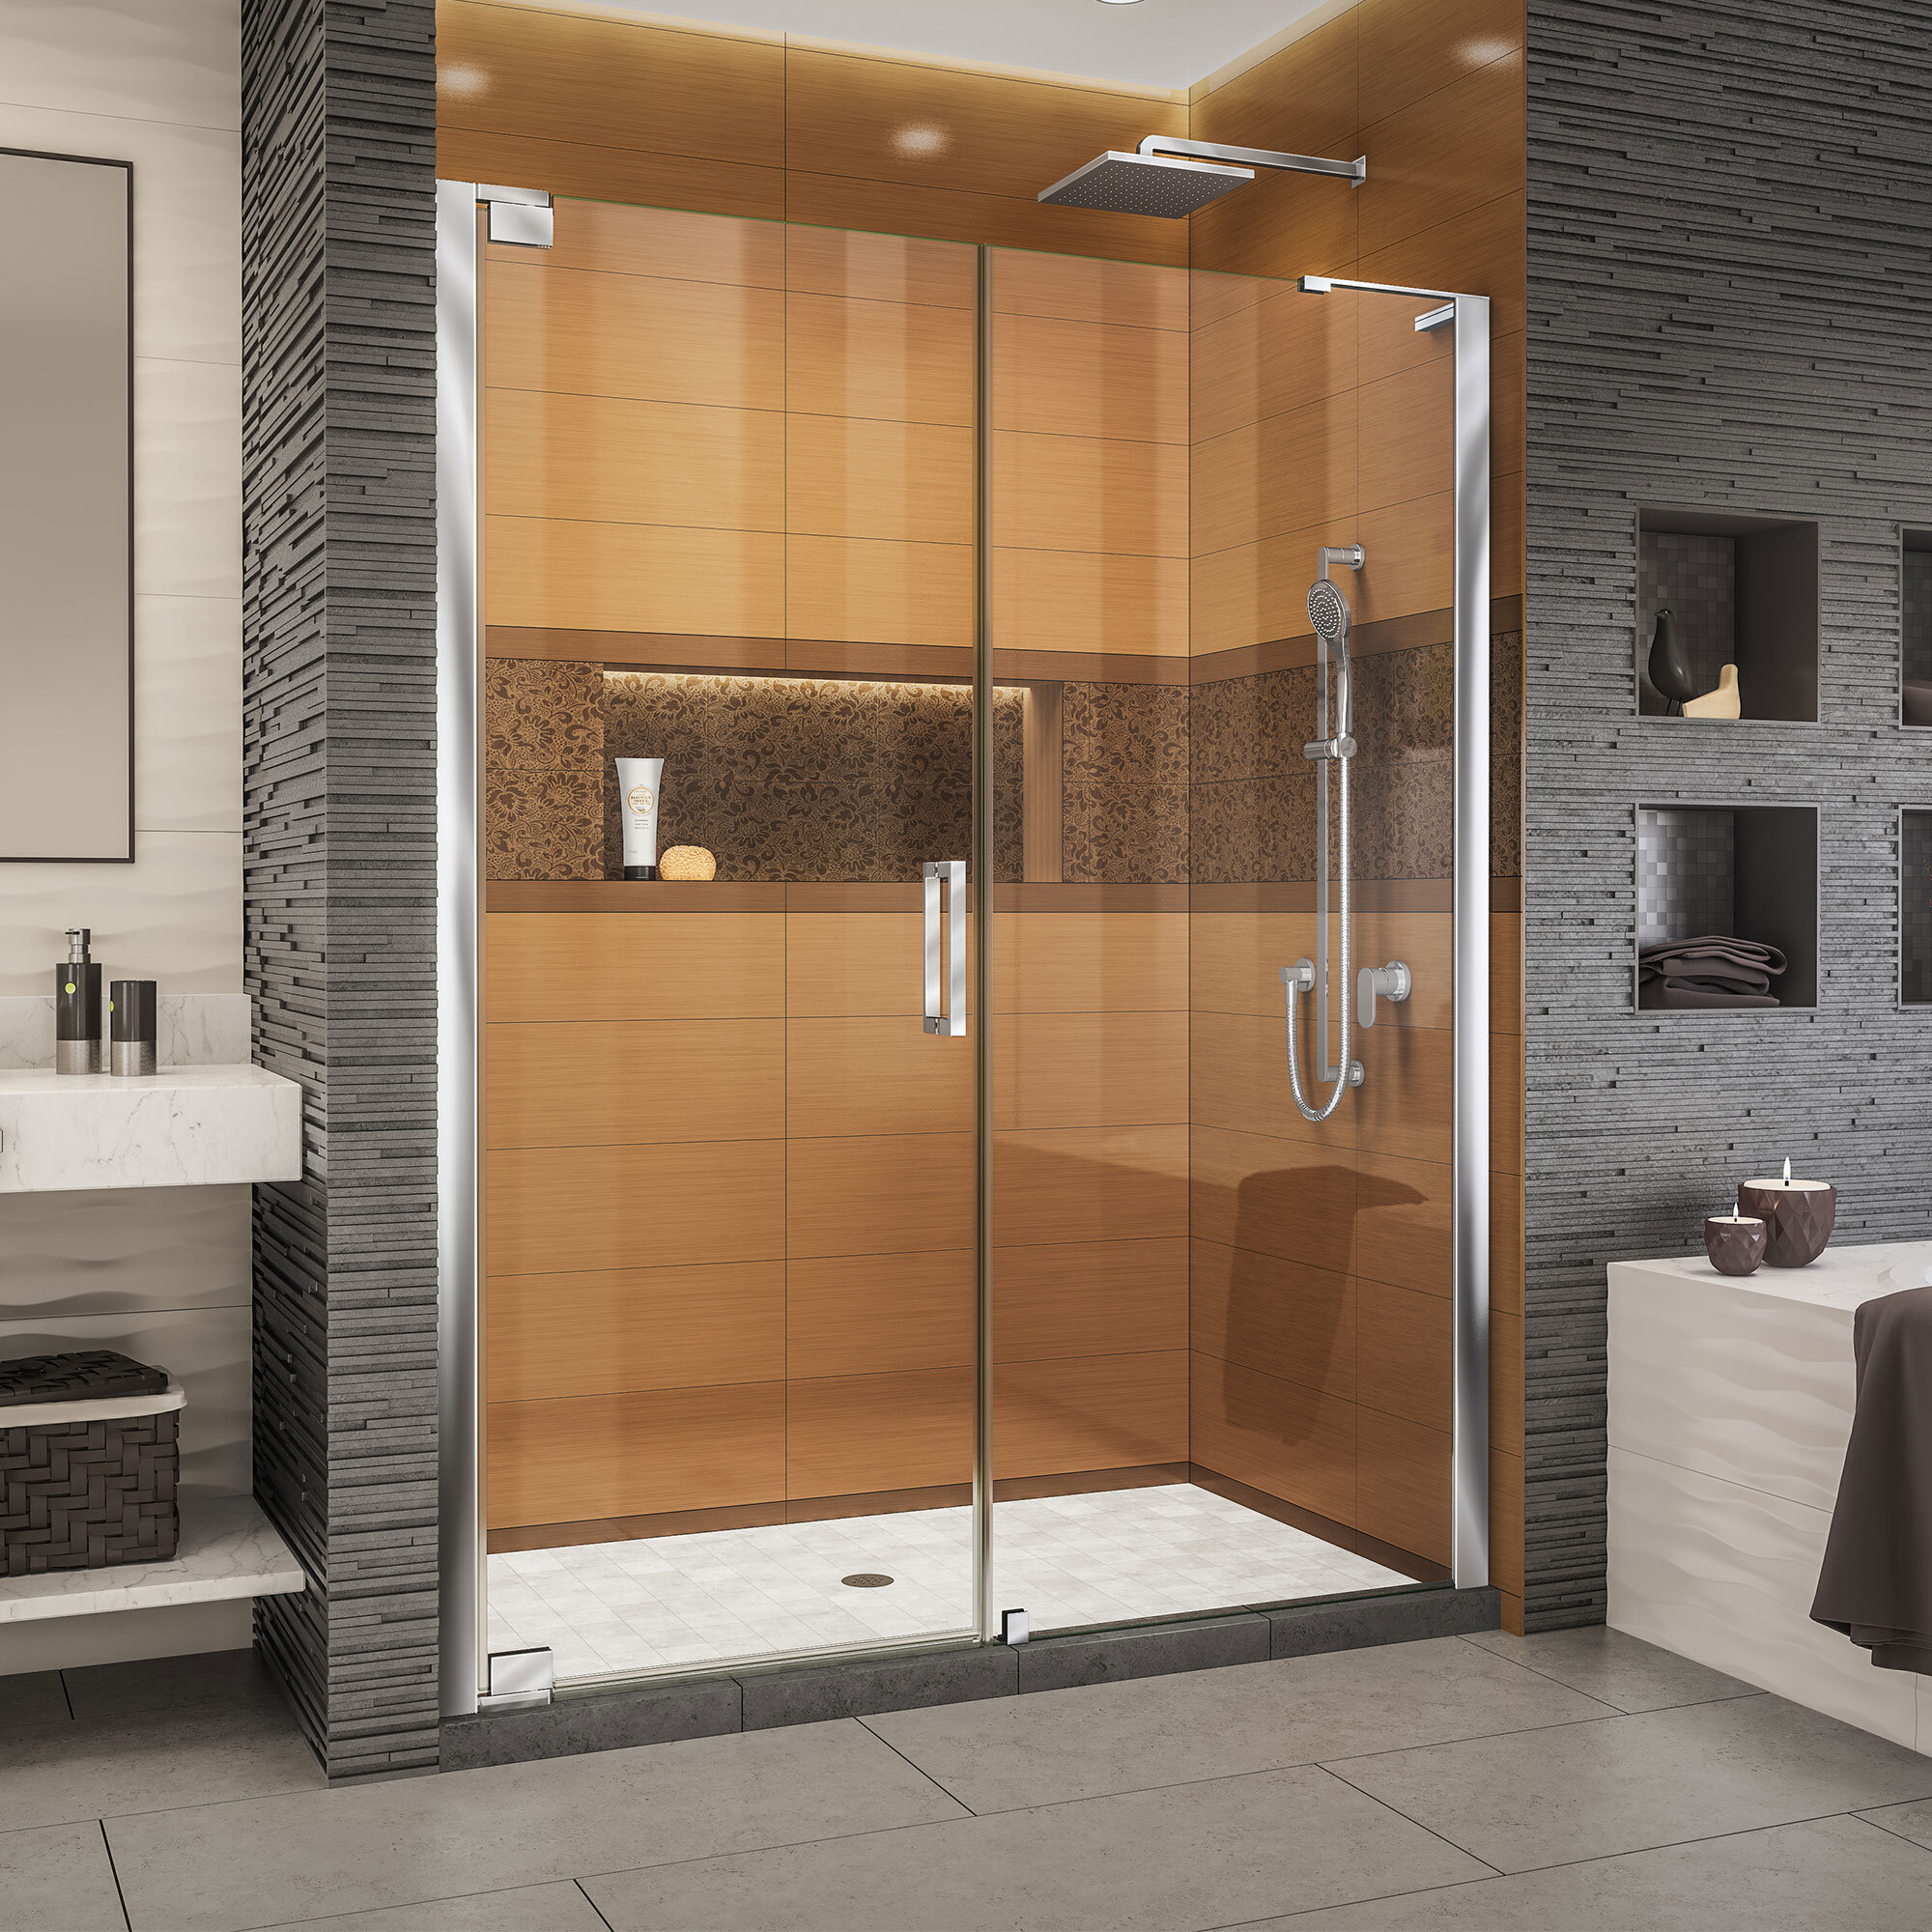 How to clean a frameless glass shower door and keep your DreamLine